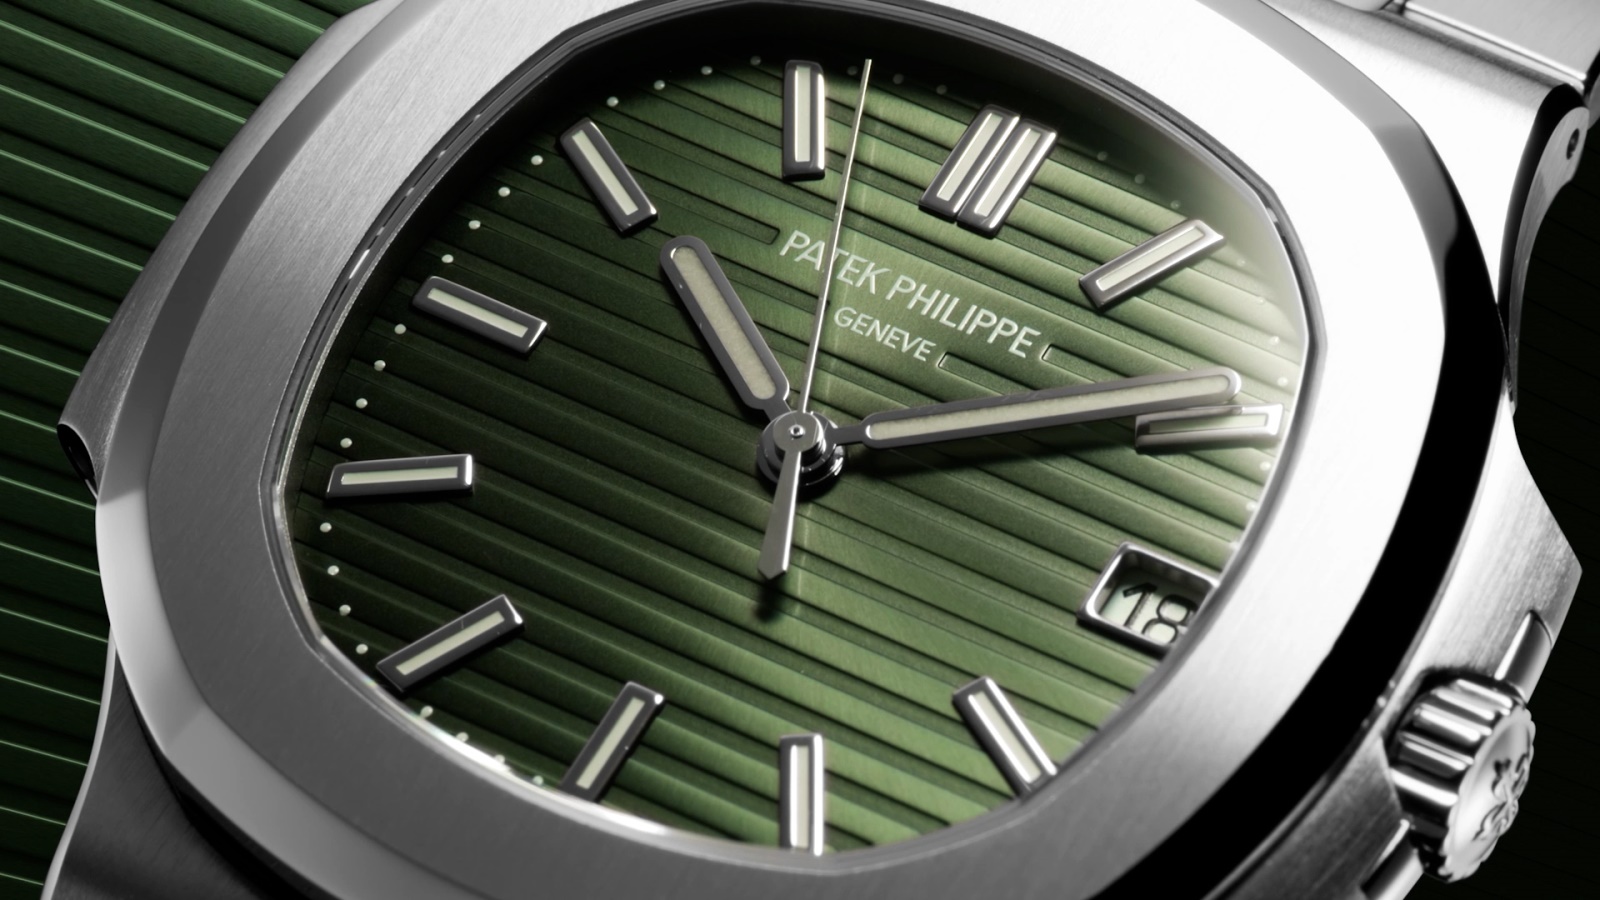 Patek Philippe set to unveil new line that may compete with its